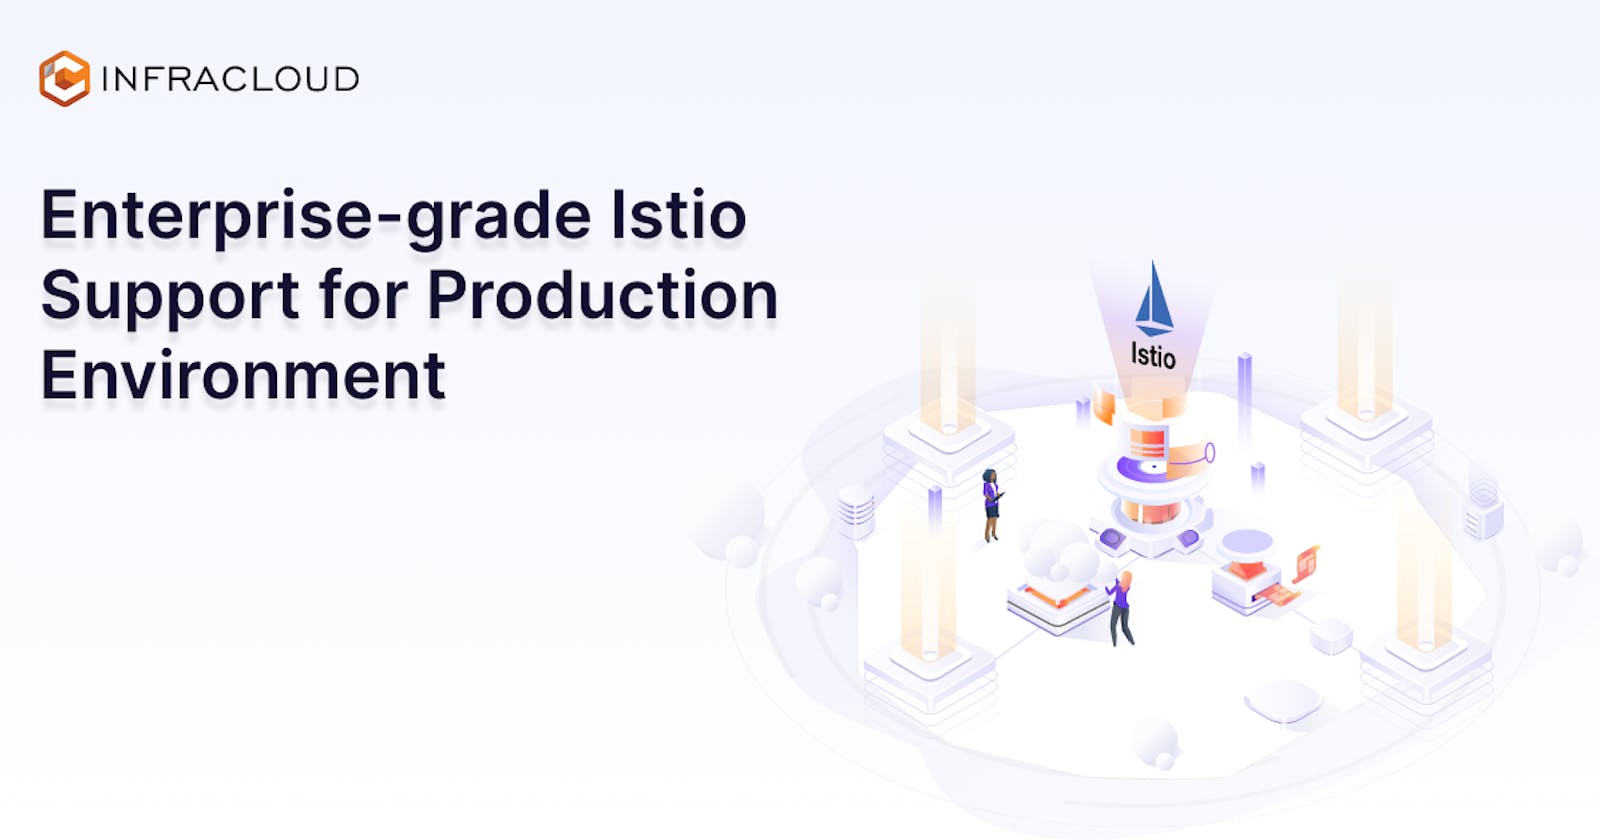 Enterprise-grade Istio Support
for Production Environment